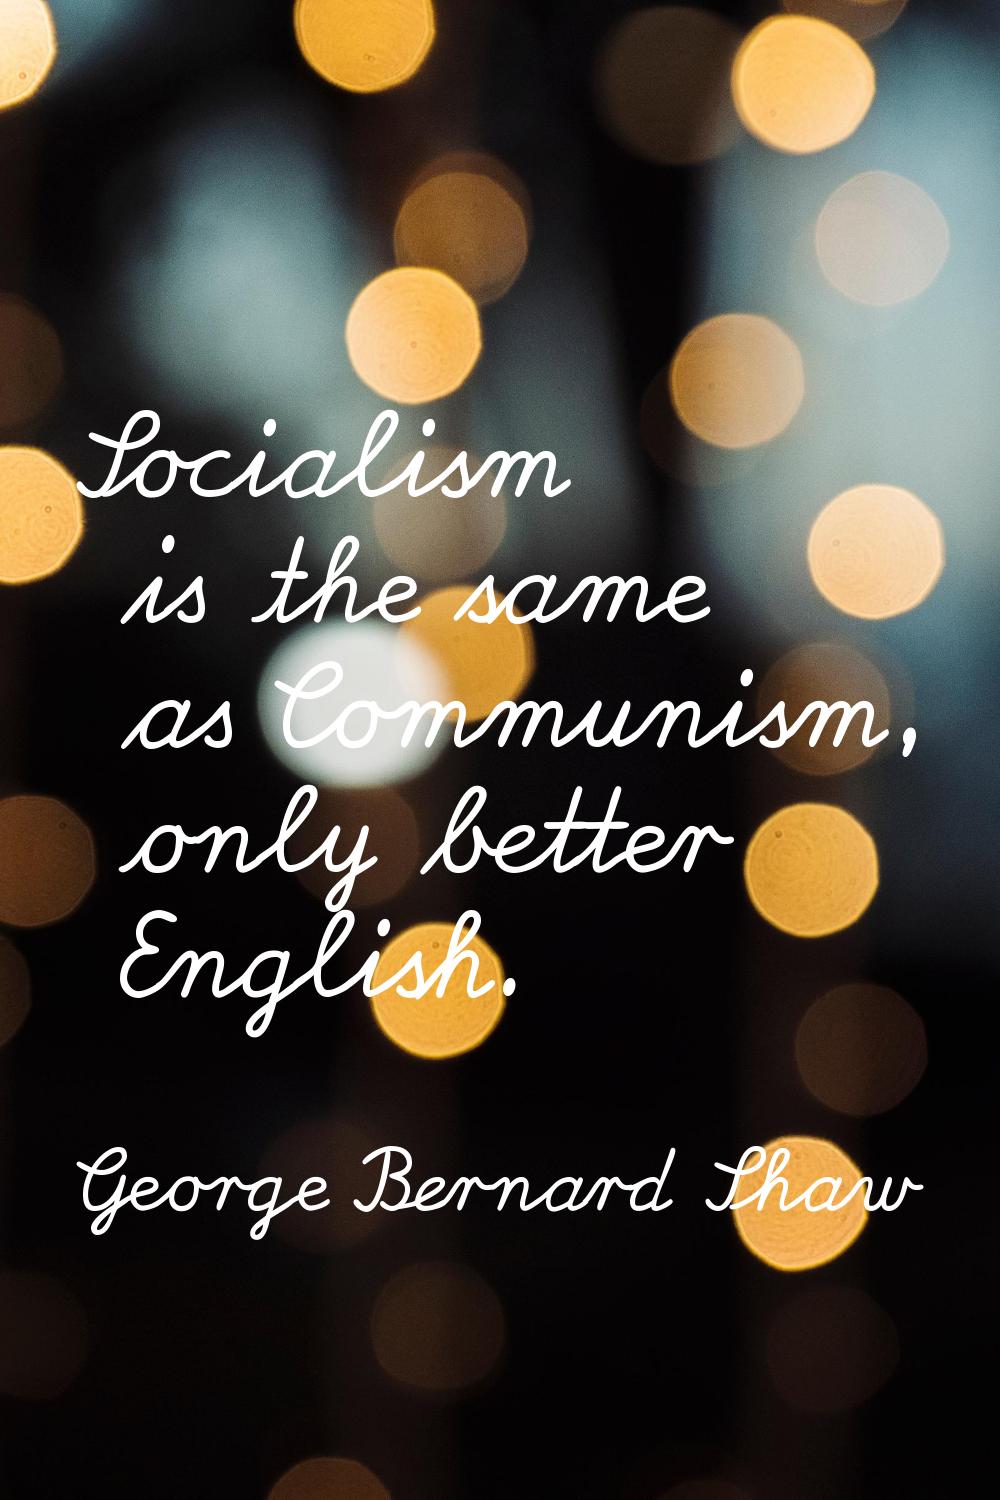 Socialism is the same as Communism, only better English.